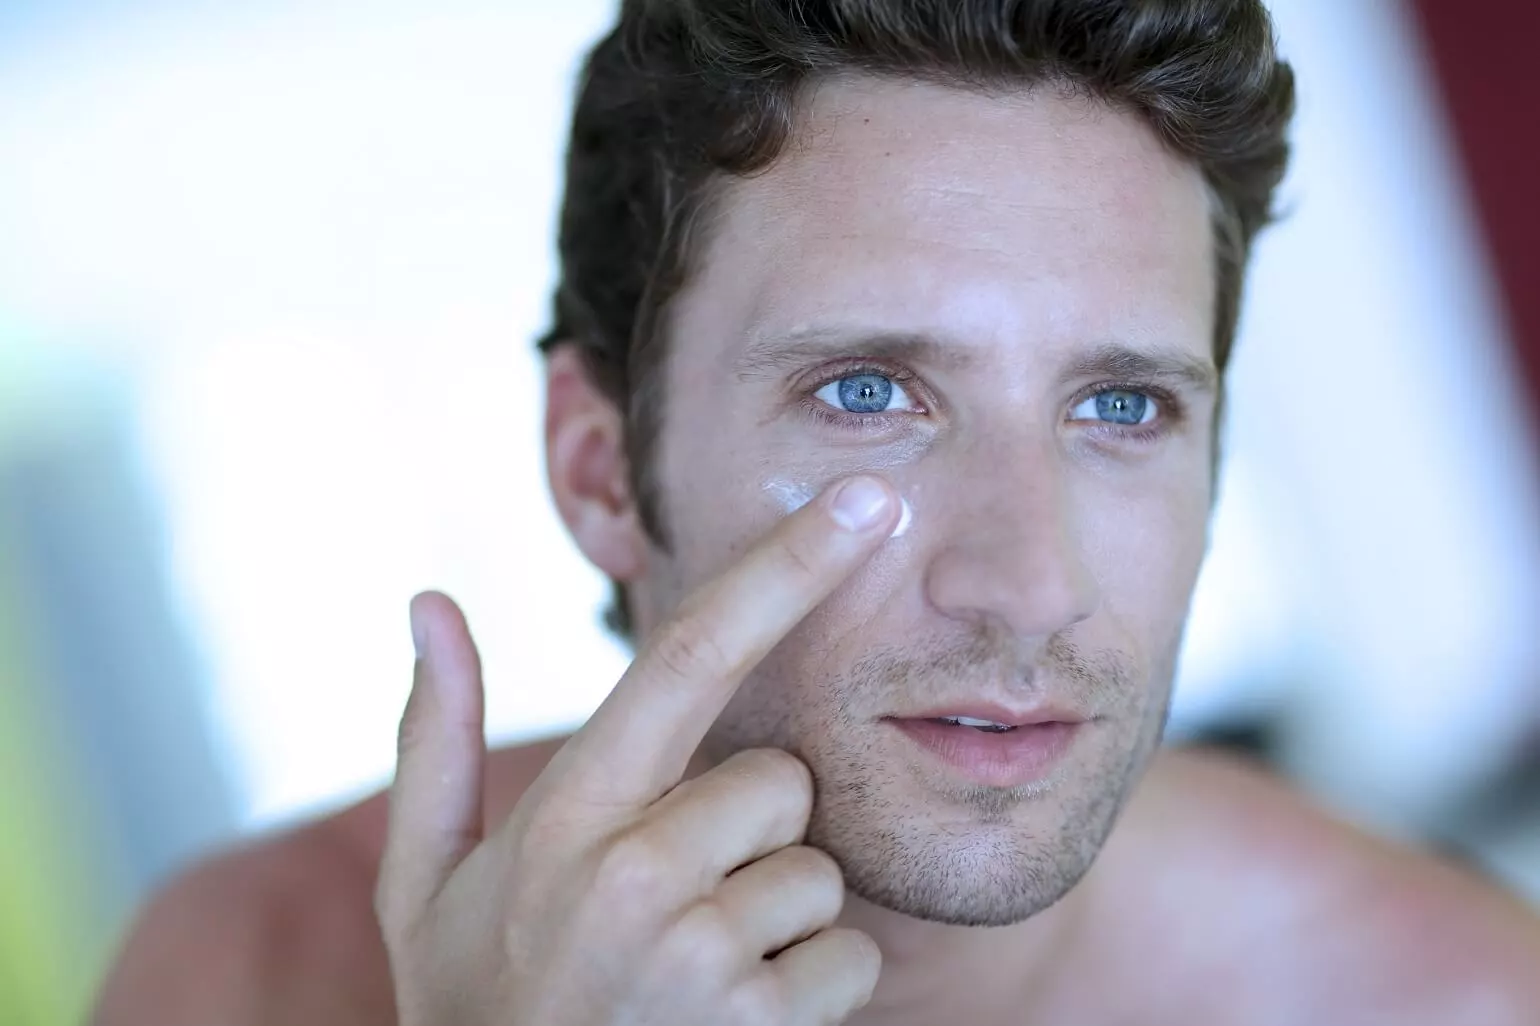 Skin Care Tips for Men to Help You Look Your Best